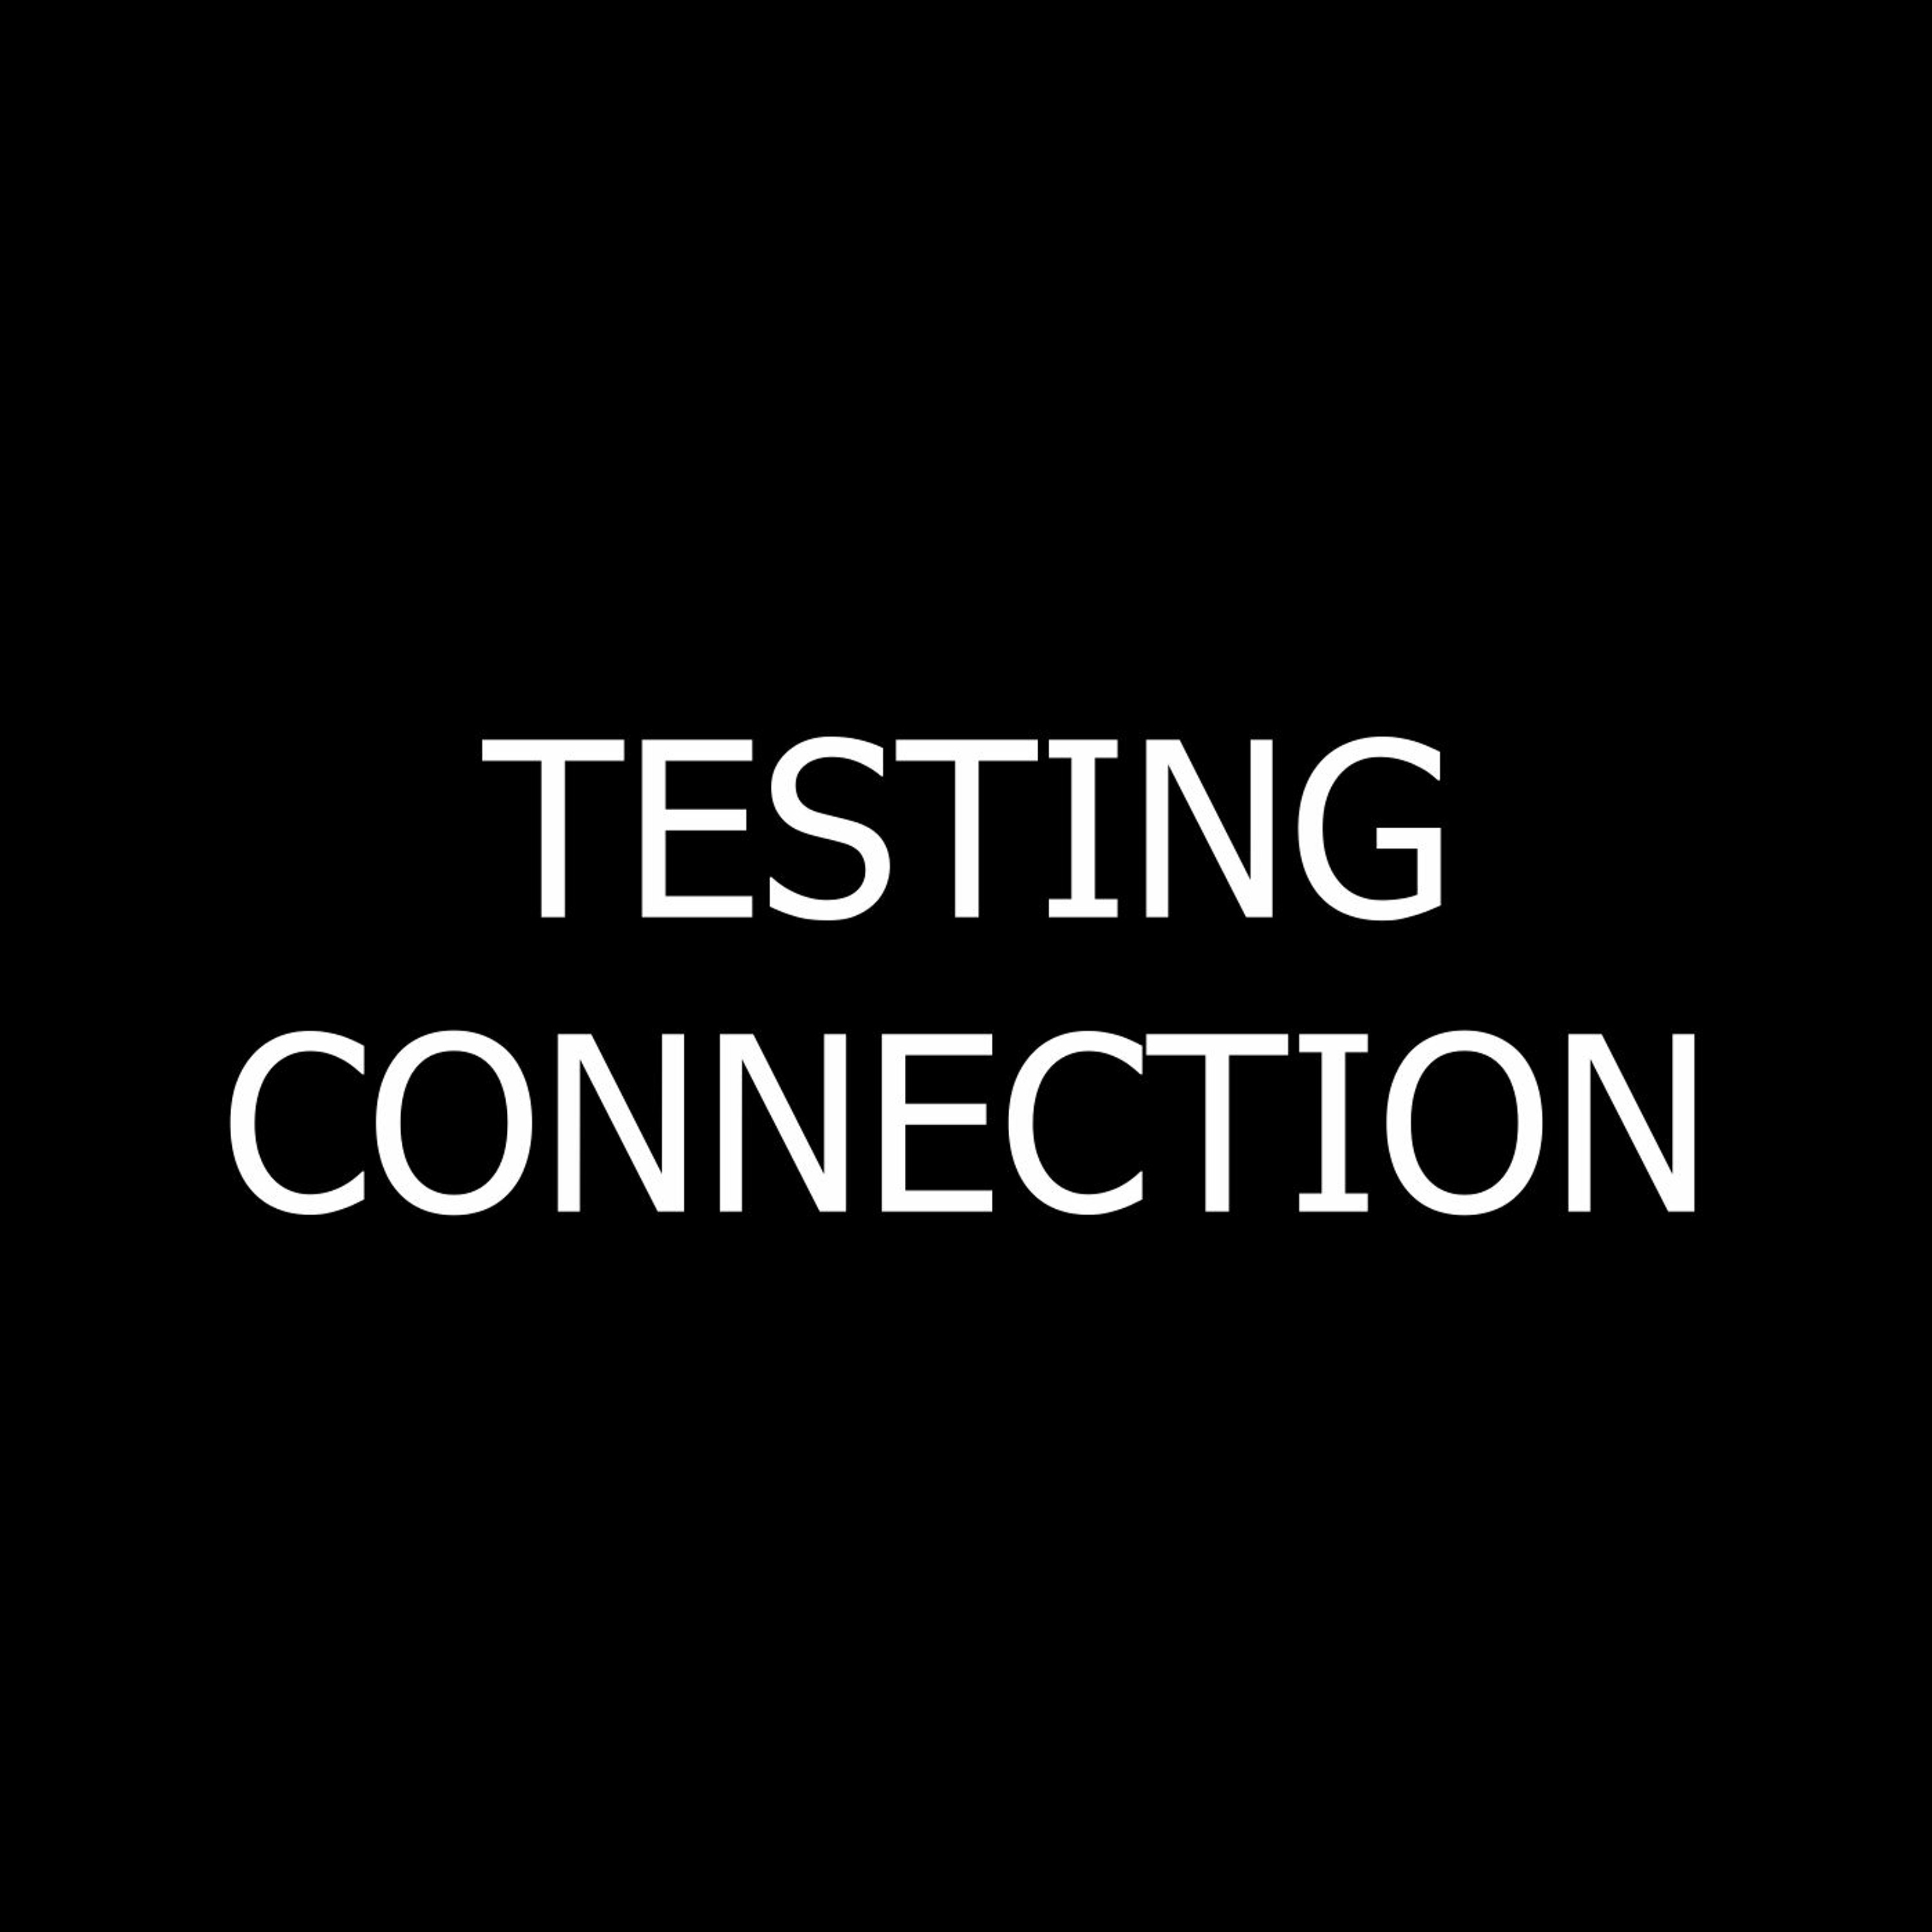 Testing Connection - 07